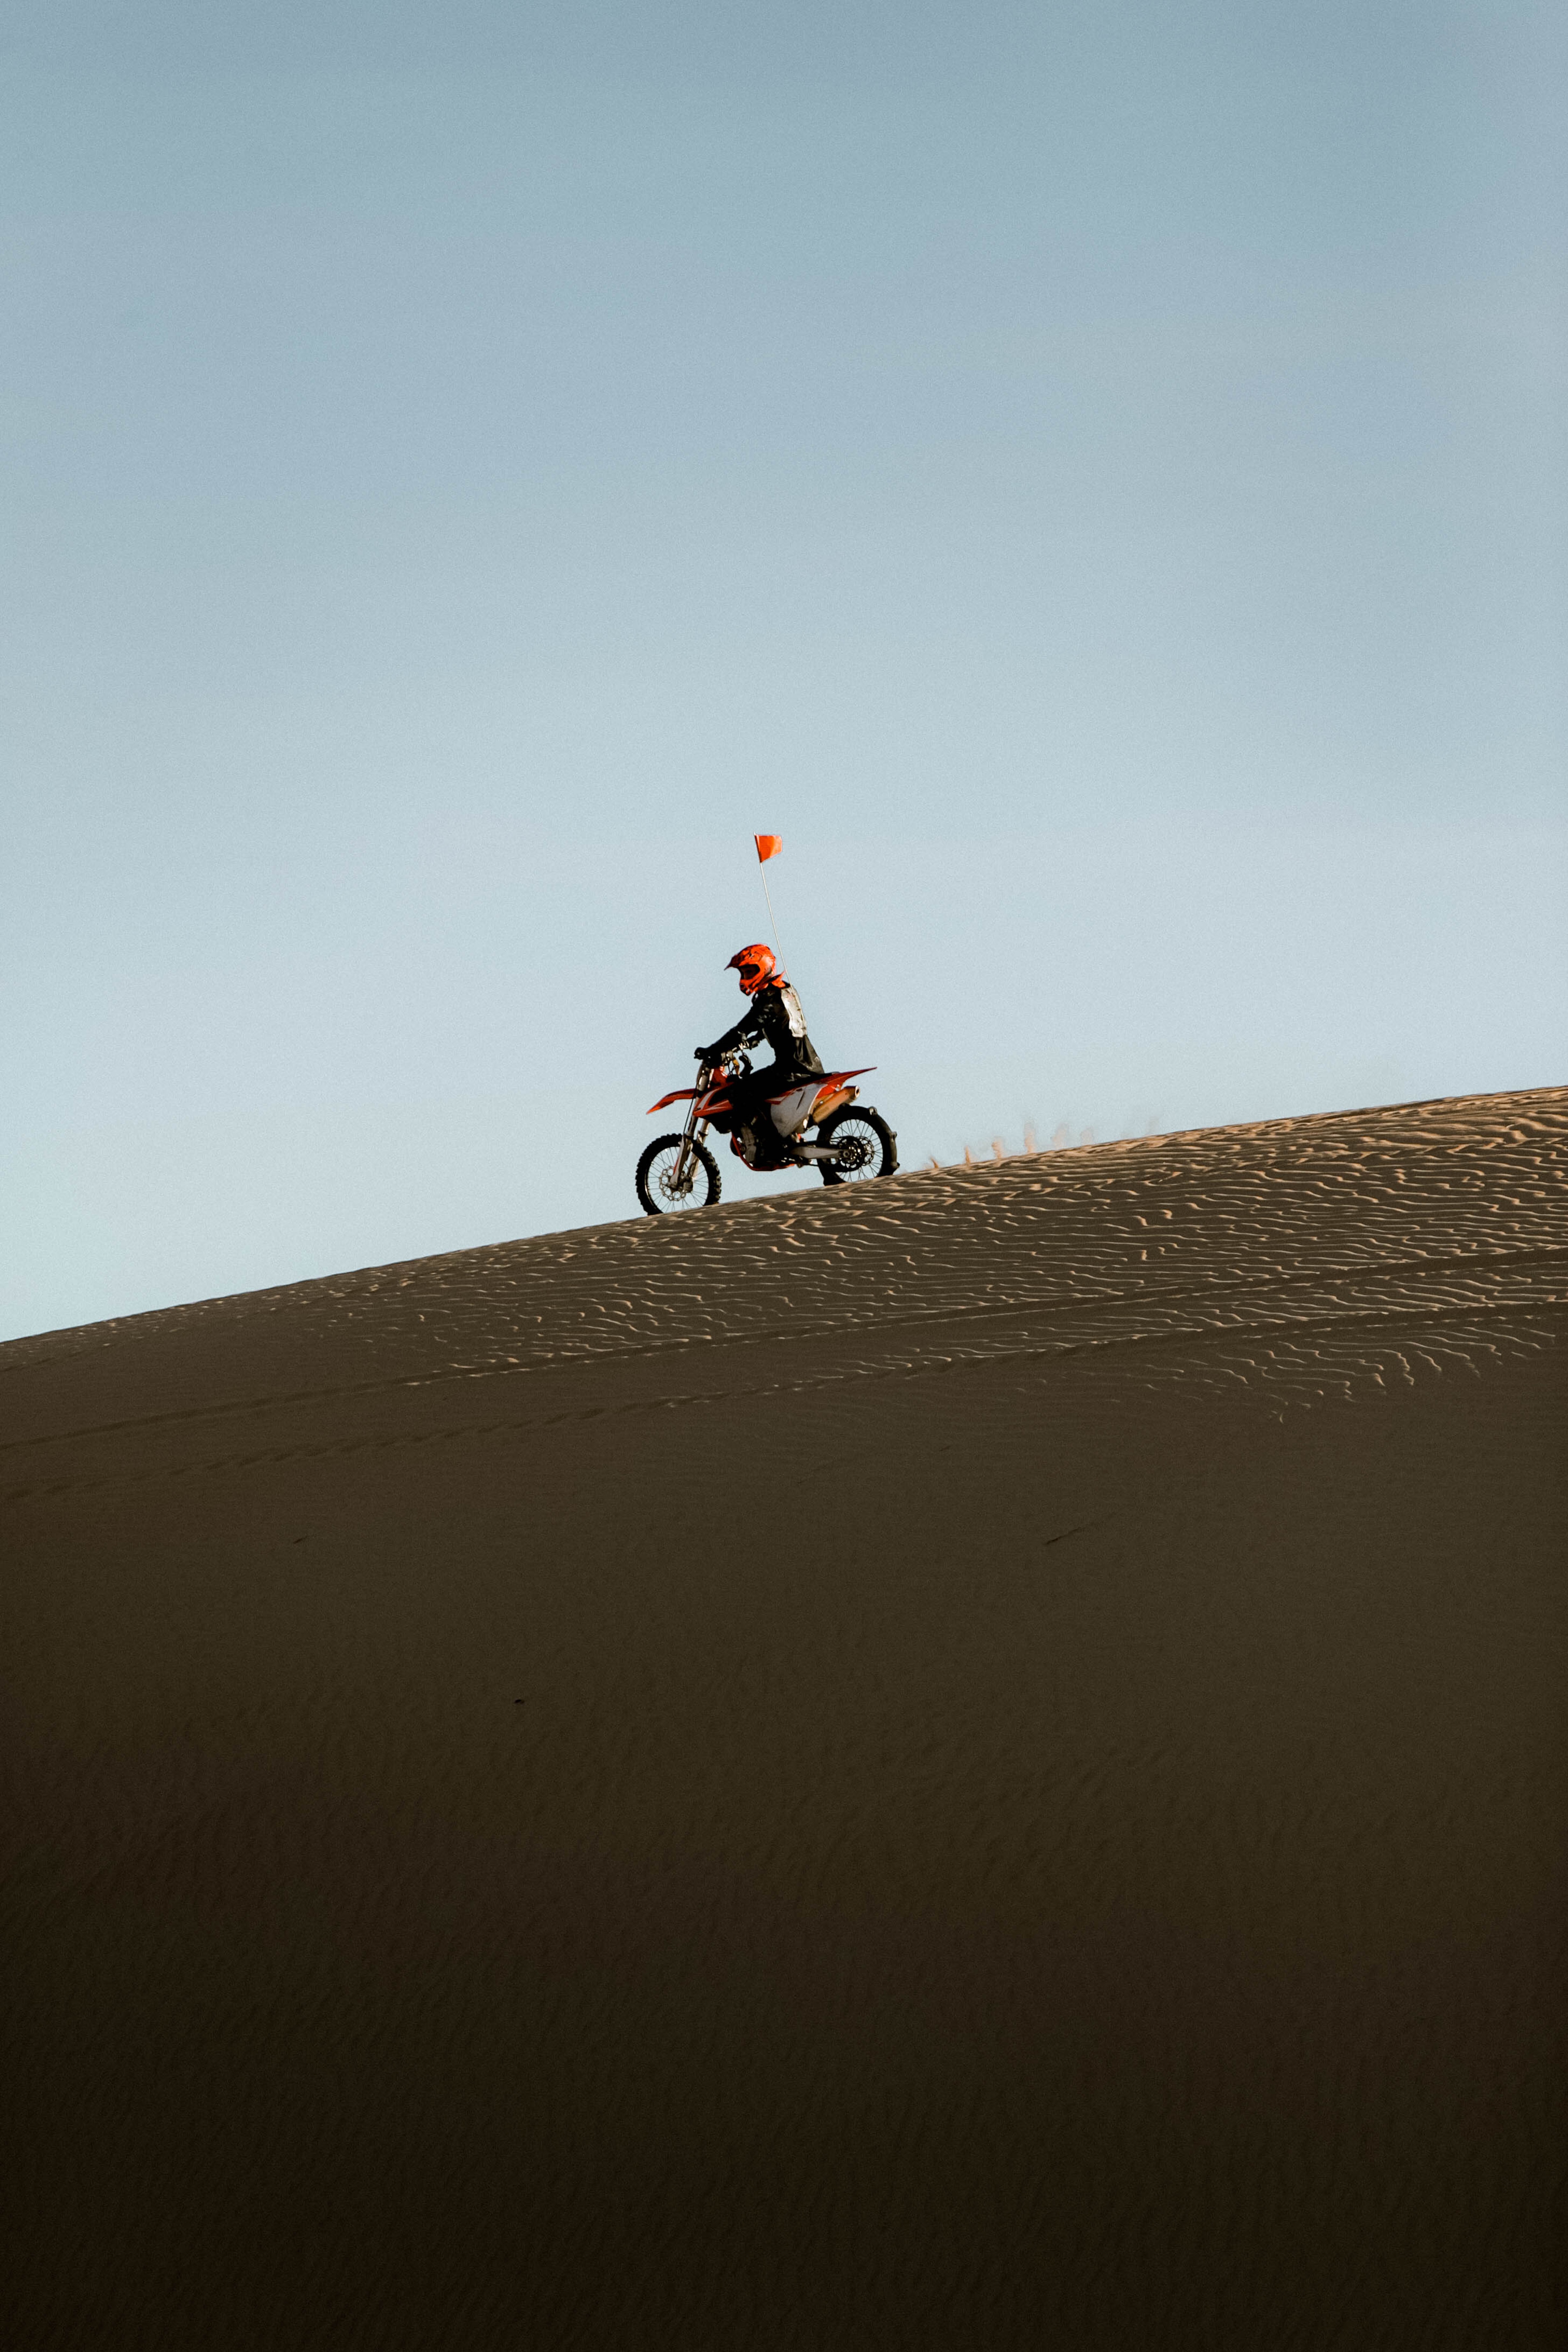 sand, motorcycles, desert, rally, motorcyclist, motorcycle